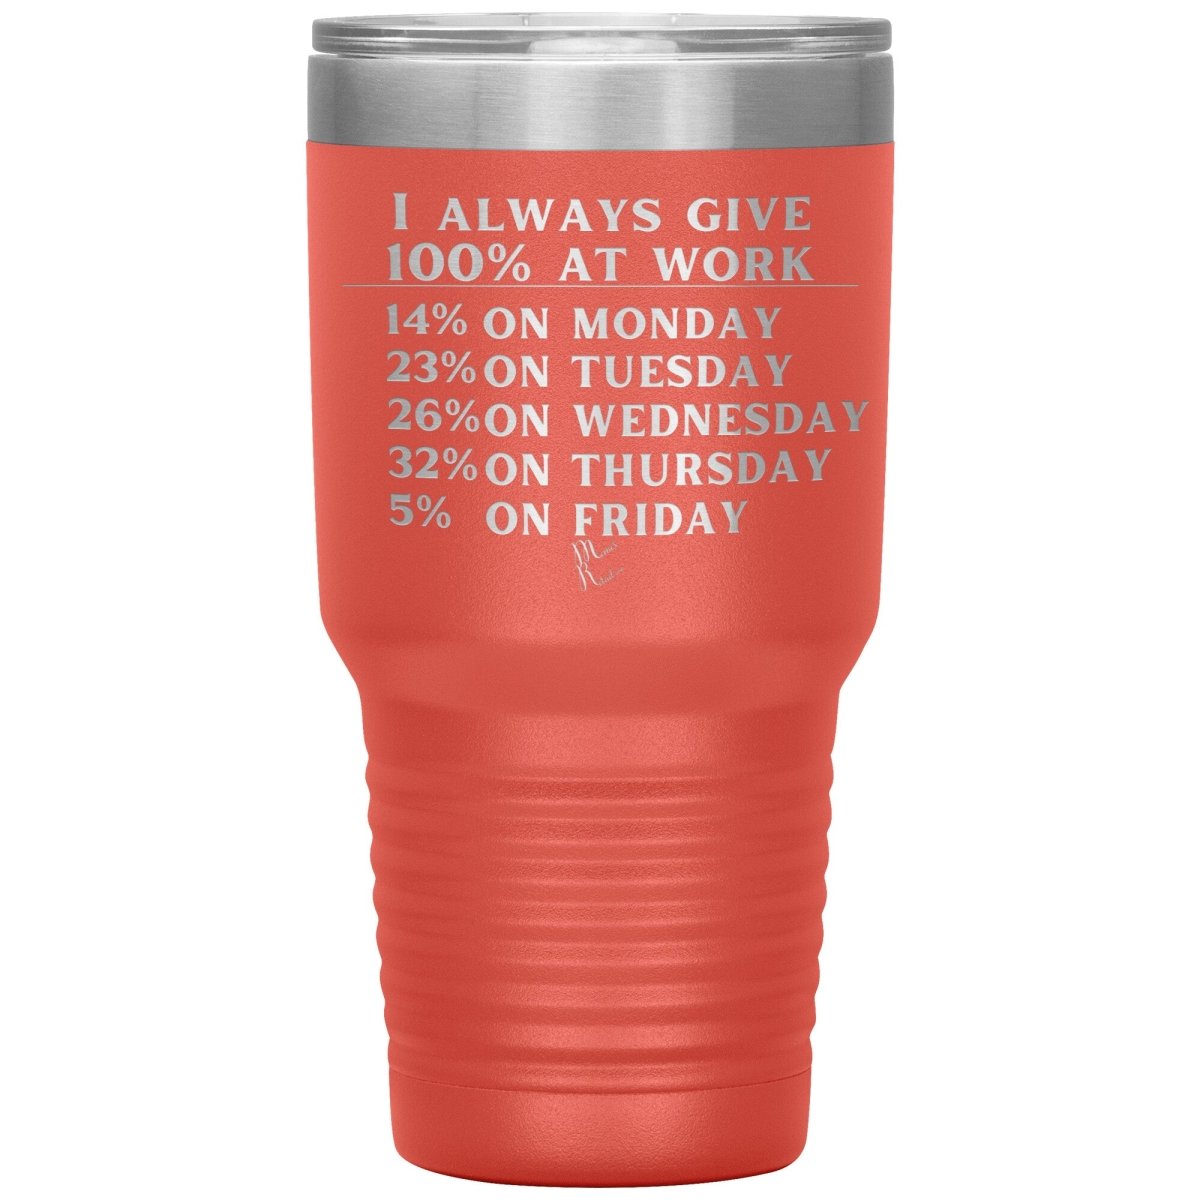 I Always Give 100% At Work Tumblers, 30oz Insulated Tumbler / Coral - MemesRetail.com